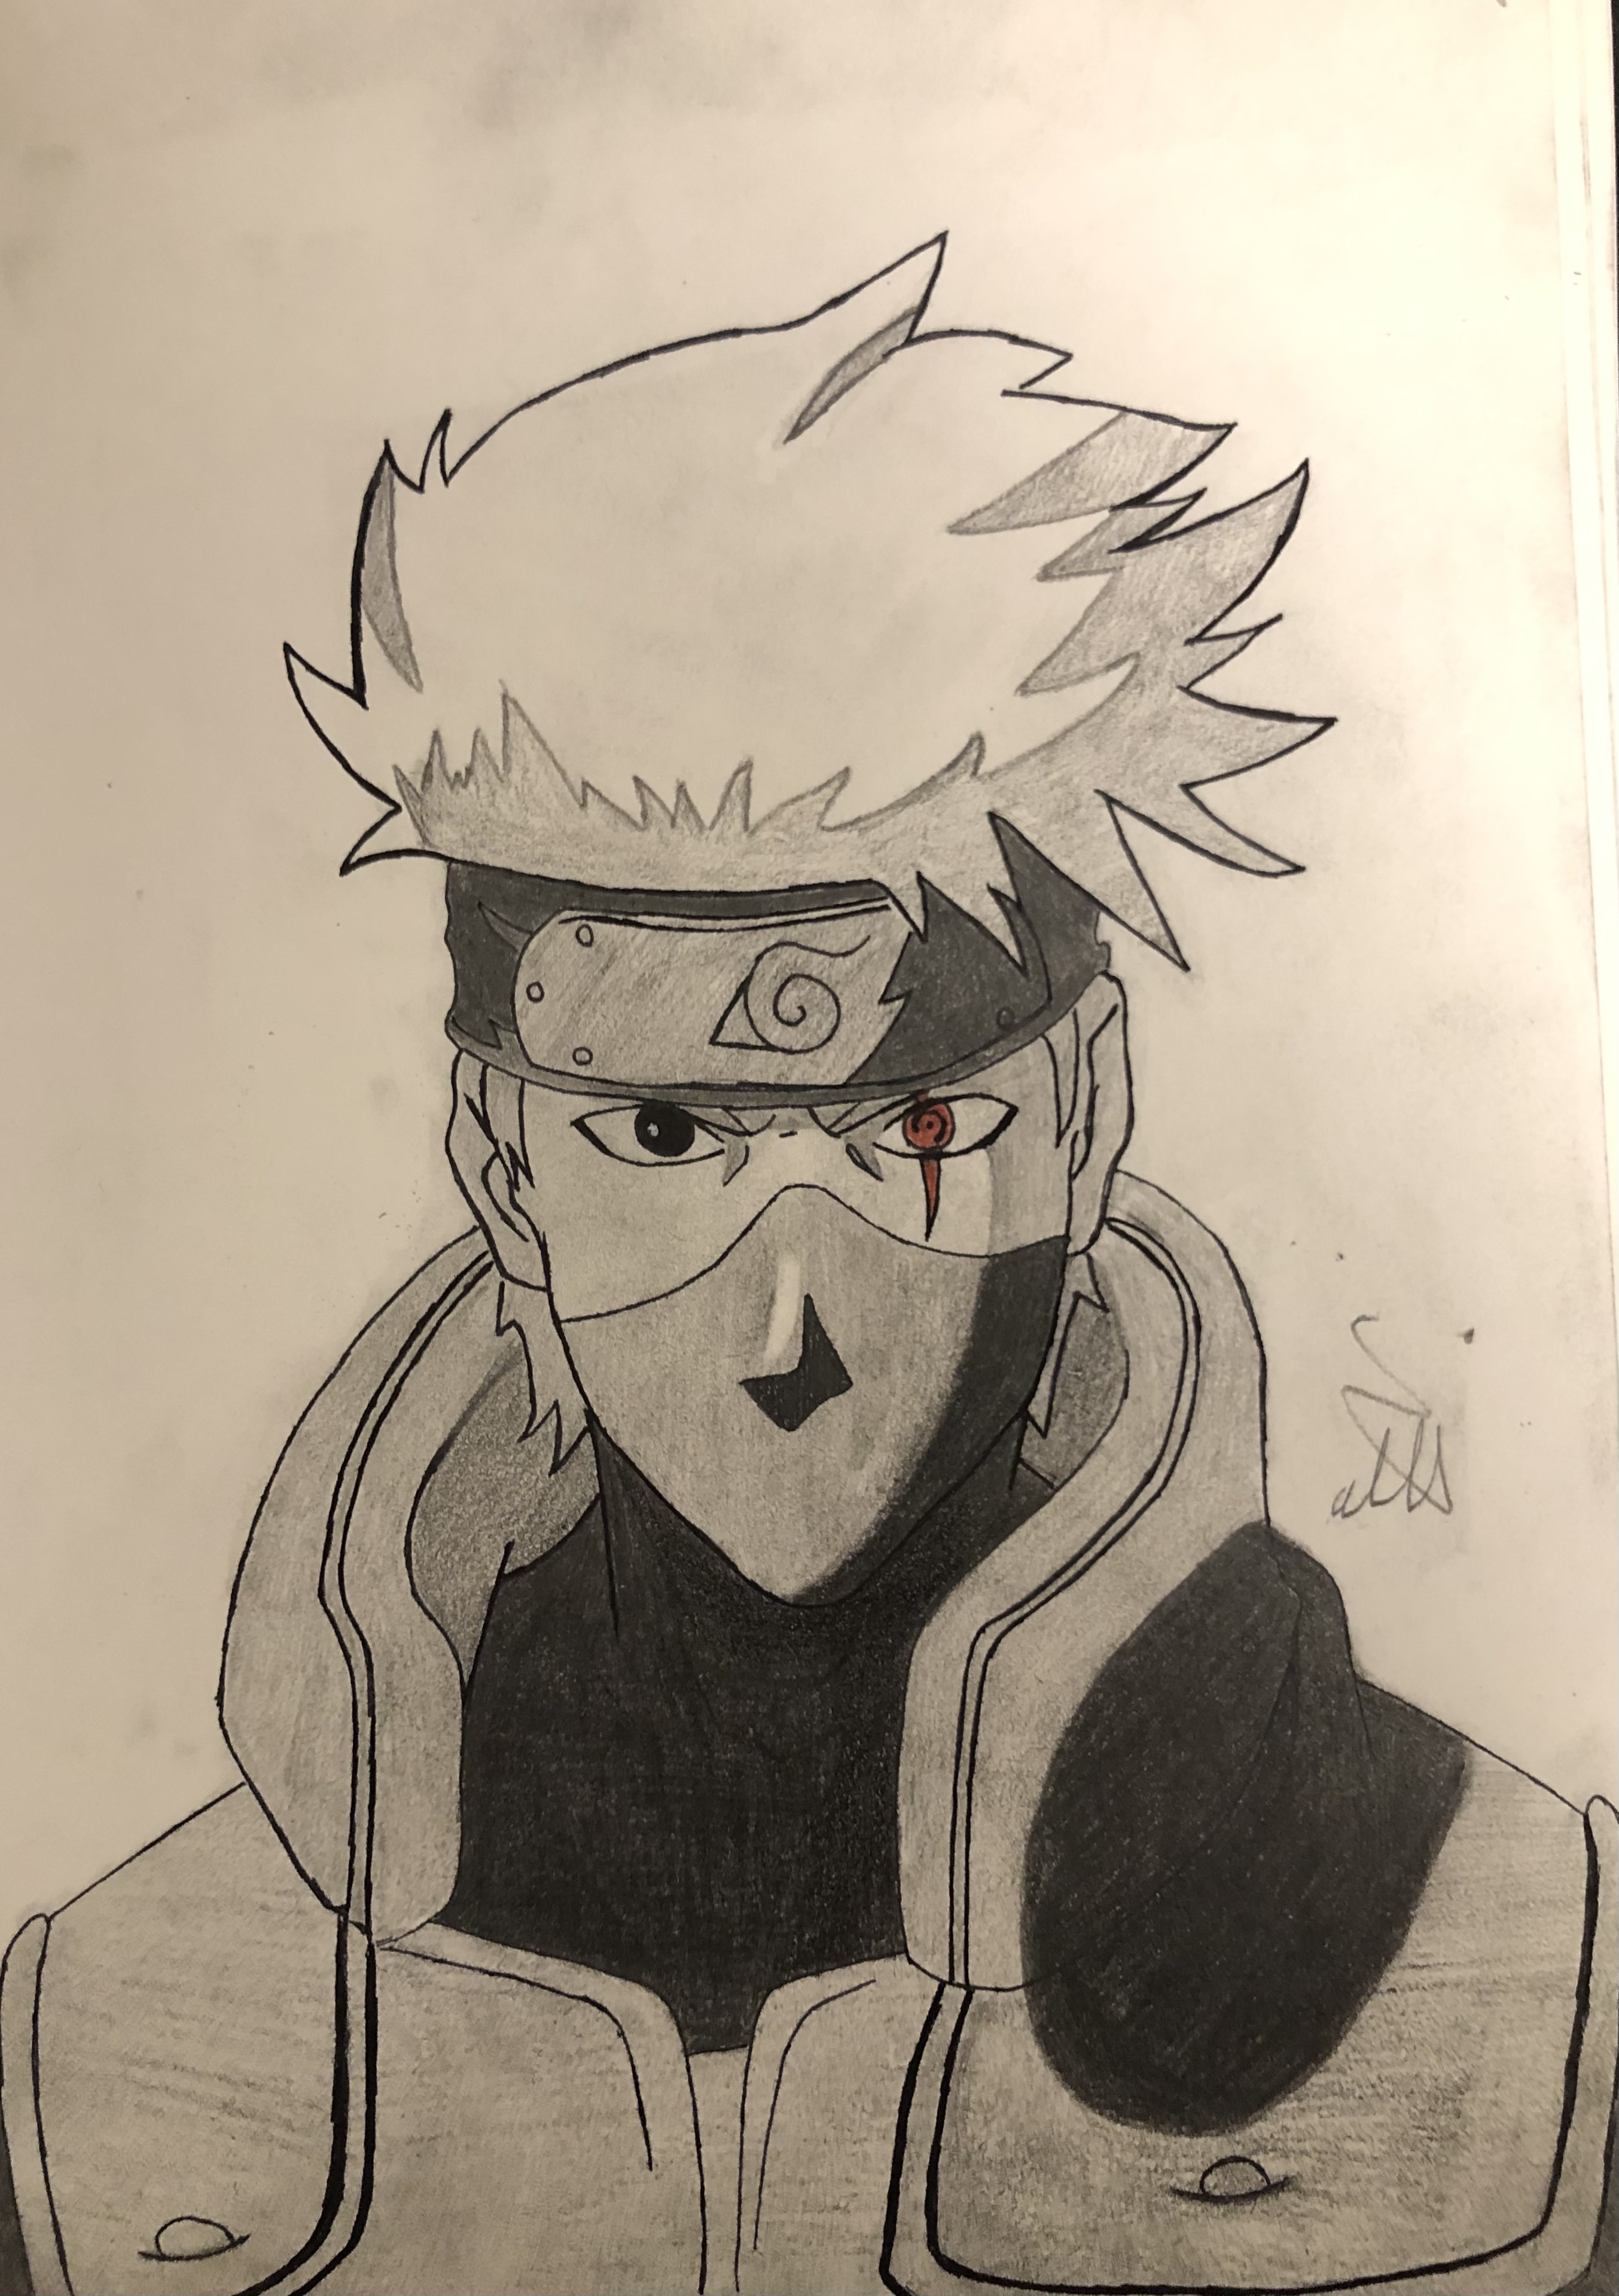 How To Draw Kakashi Hatake - Step By Step for beginners, kakashi from naruto  drawing - thirstymag.com